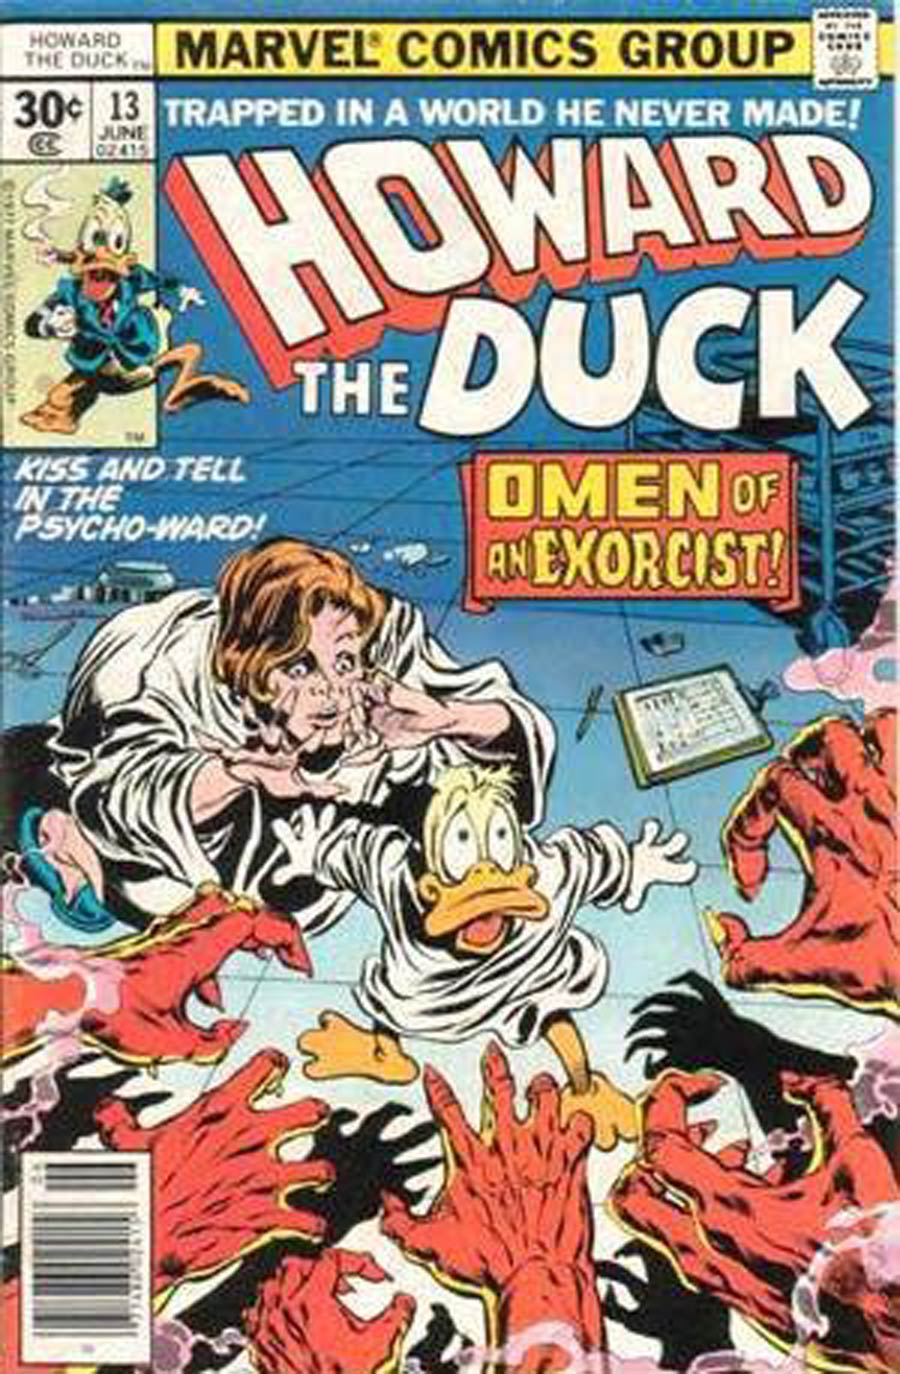 Howard The Duck Vol 1 #13 Cover A 30-Cent Regular Edition